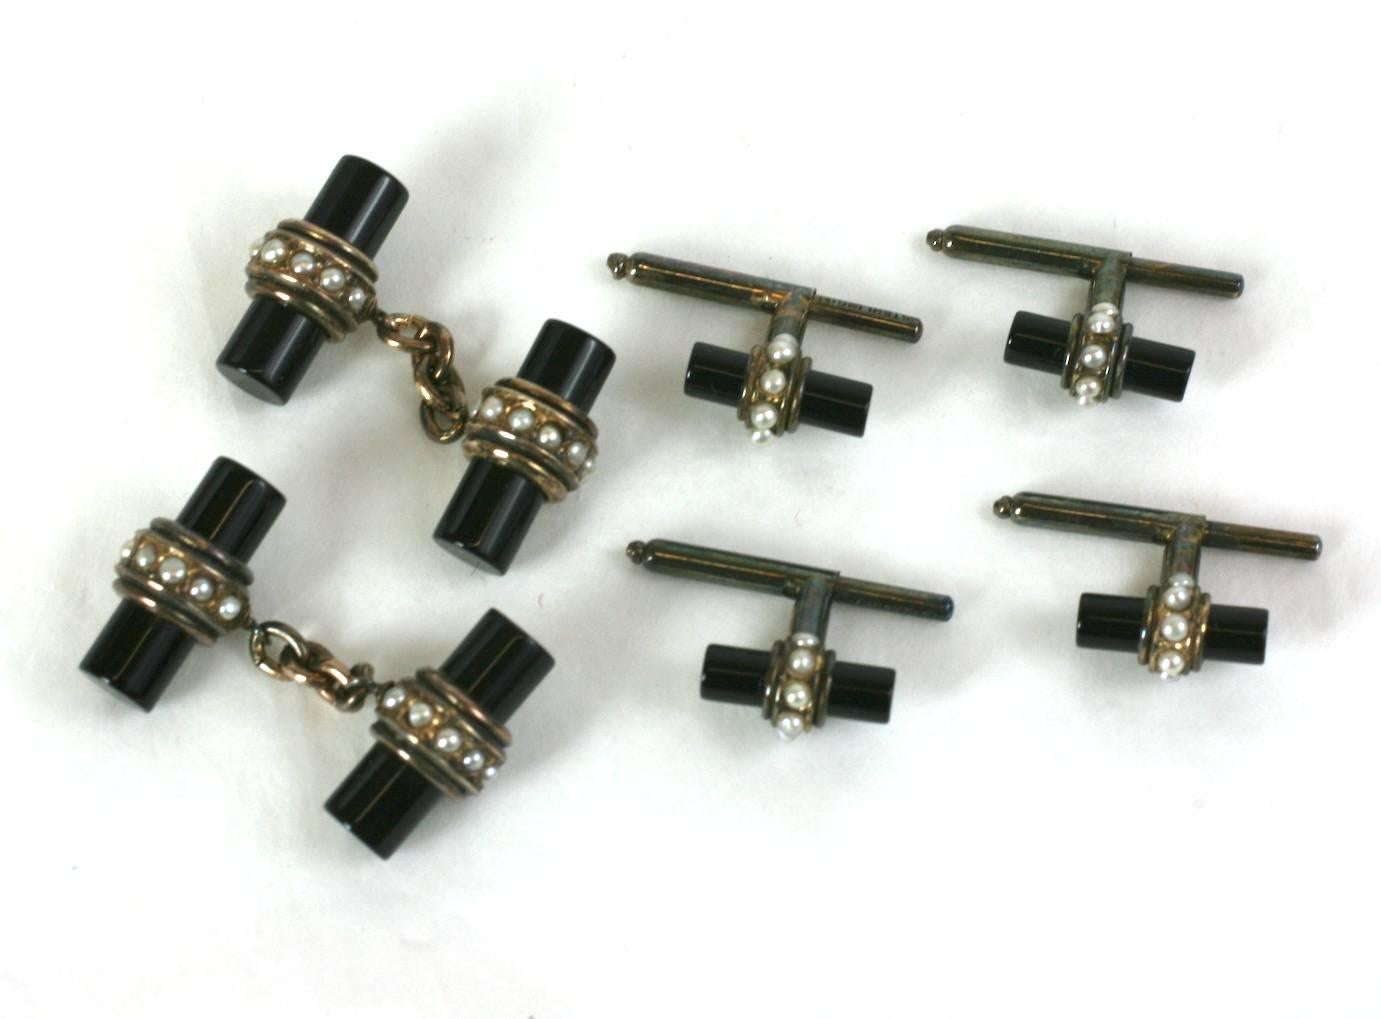 Unusual Art Deco Onyx and Pearl Stud Set, comprised of a pair of cufflinks and 4 shirt or vest studs. Deco onyx batons are set in vermeil sterling with a natural half pearl surrounds. Highly unusual mix of materials for the period. 1915-1920's USA.